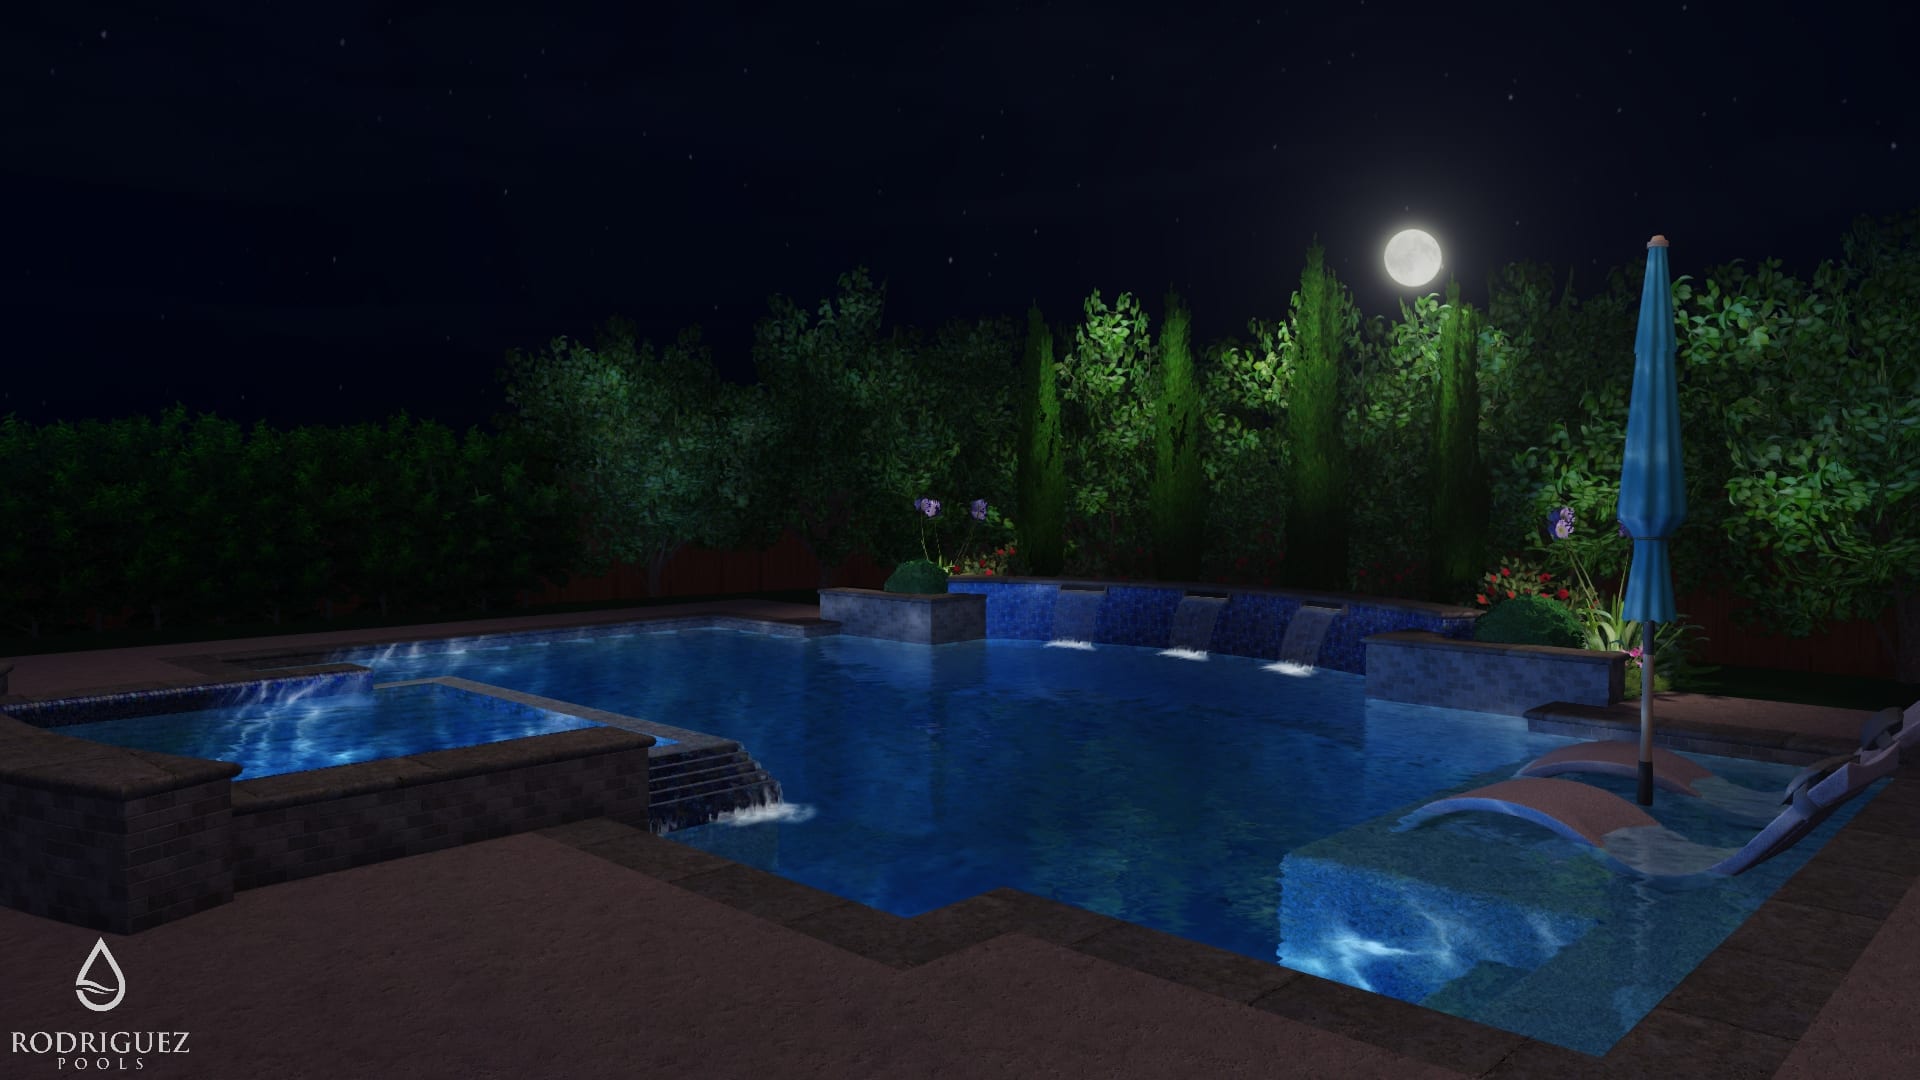 A pool with lights on and trees in the background